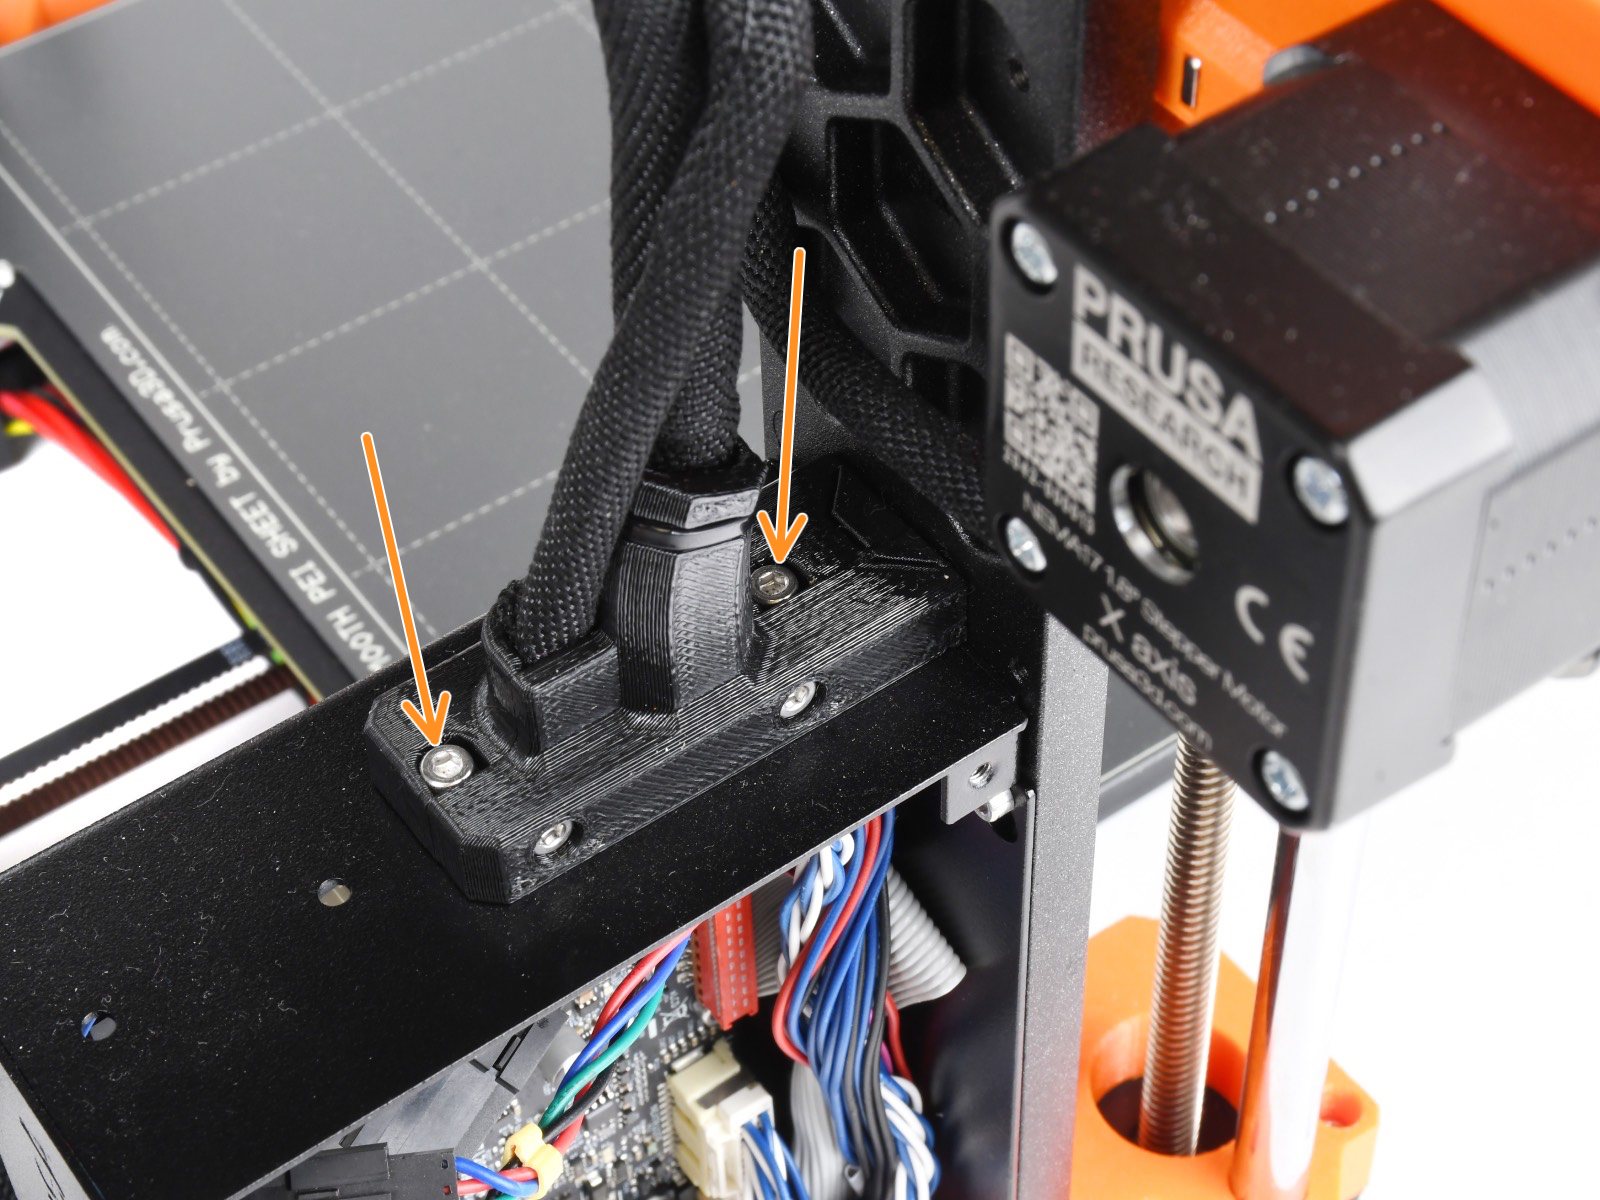 Installing the extruder cable bundle